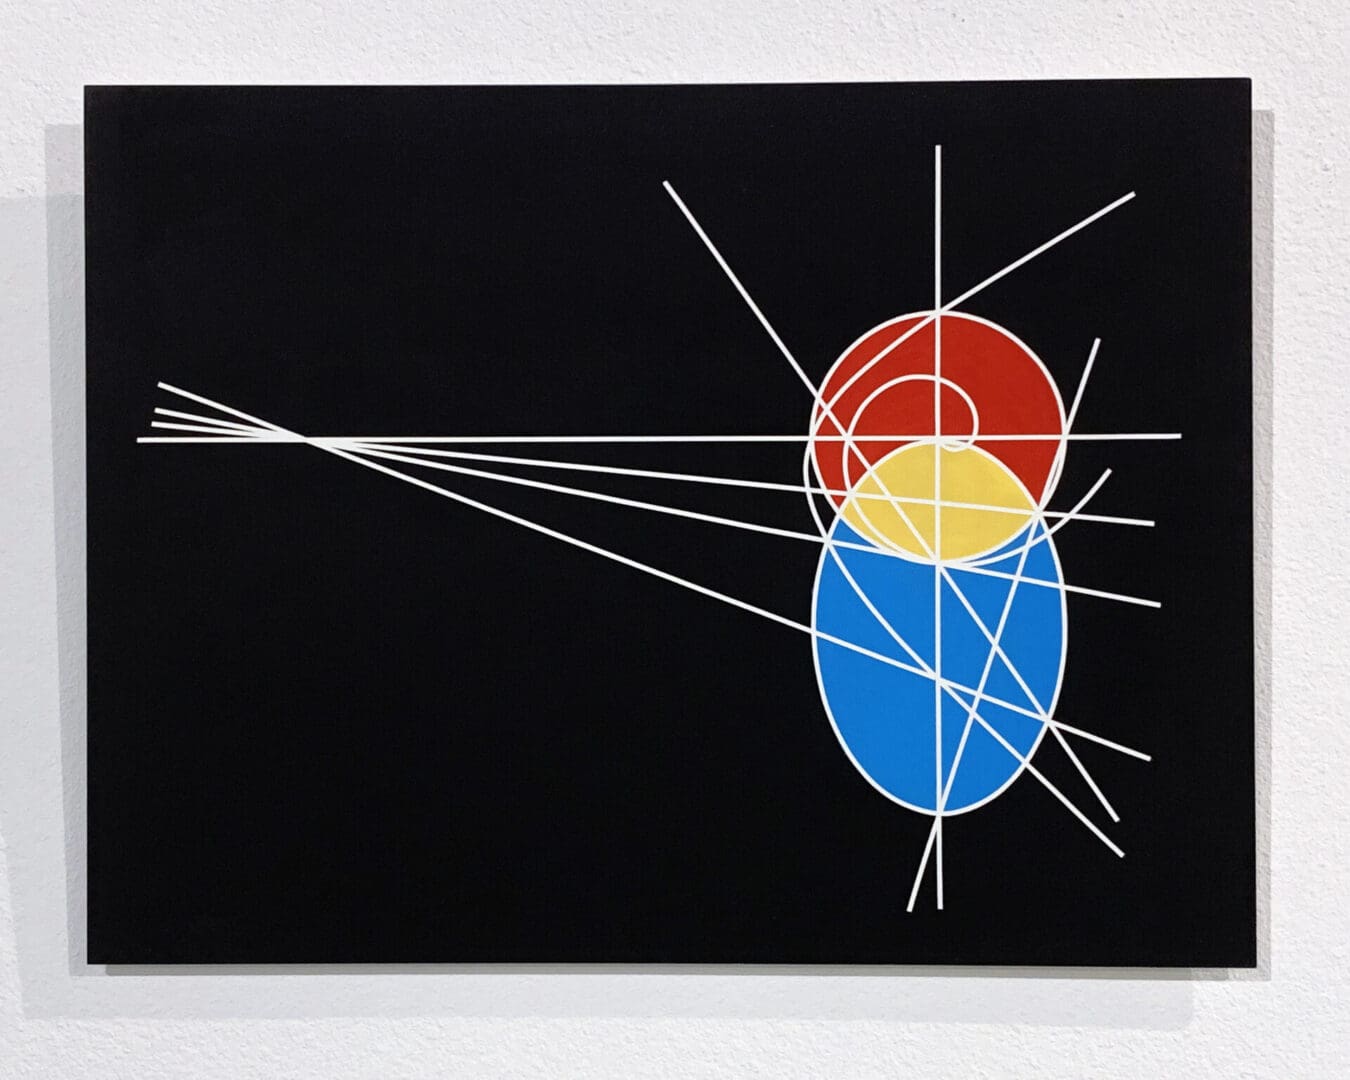 Clifford Singer. Black, Red, Yellow, Blue. 200